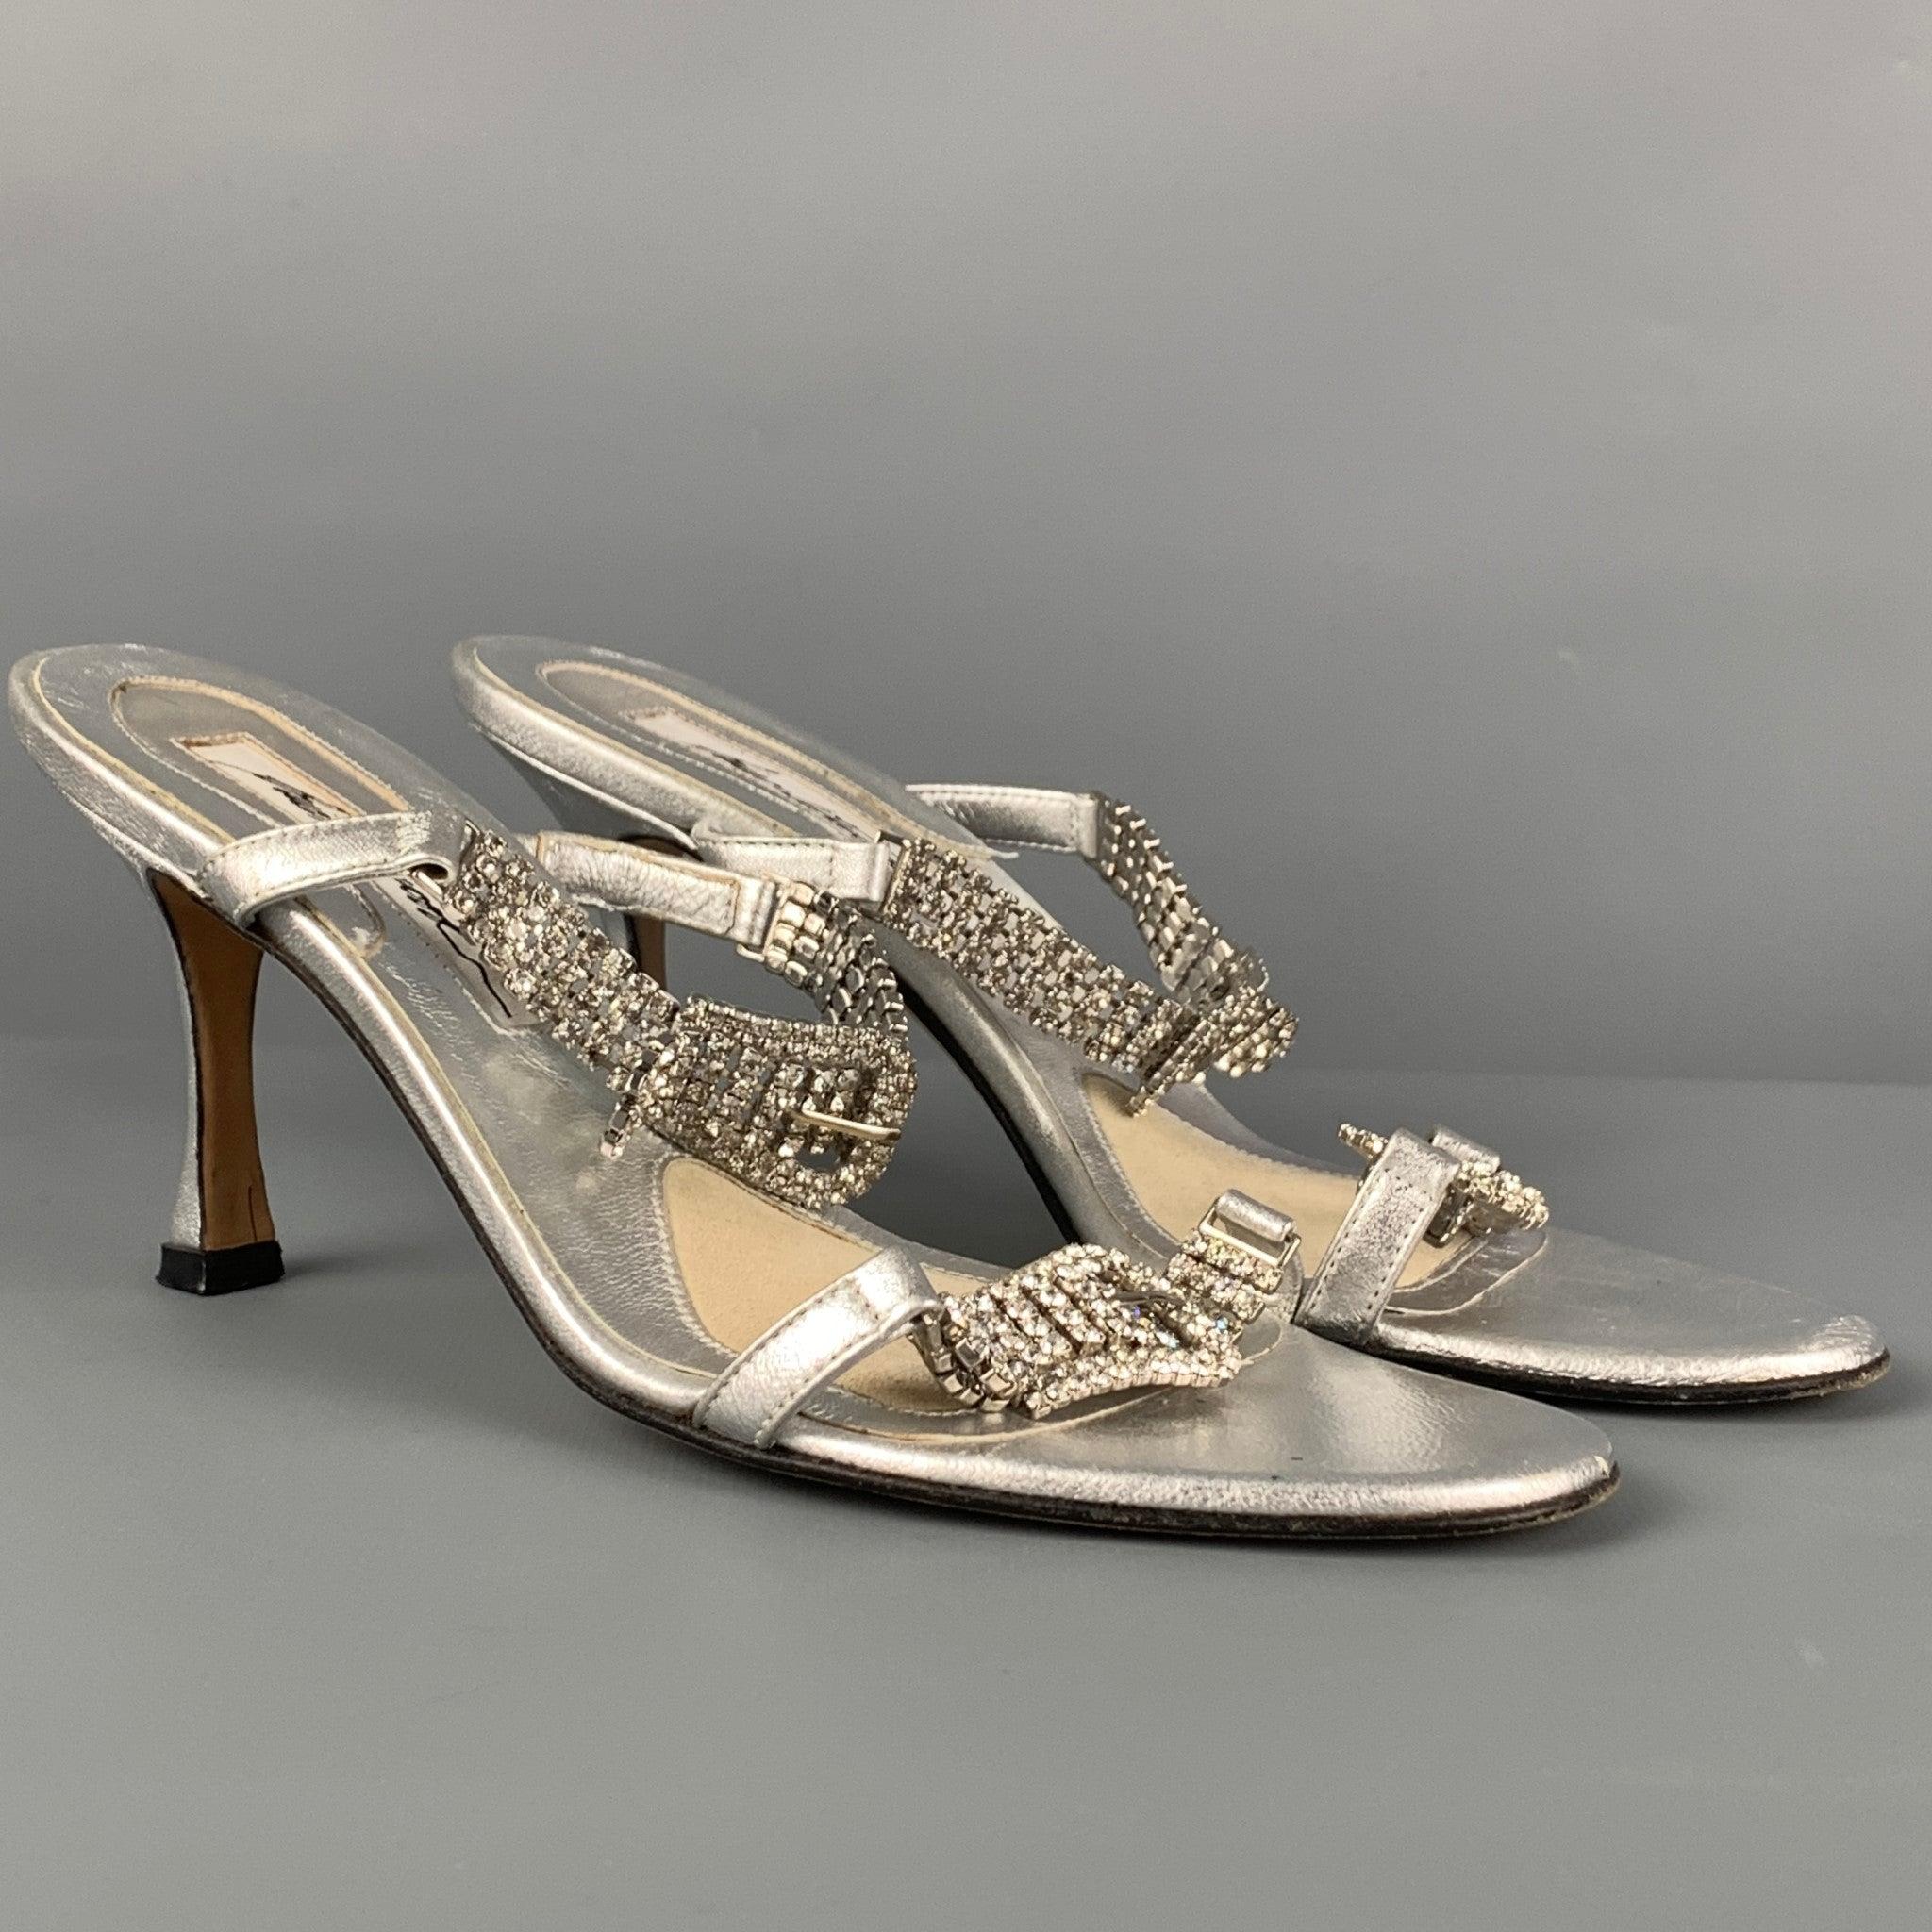 BRIAN ATWOOD sandals comes in a silver leather featuring a buckle rhinestone detail and a stiletto heel. Made in Italy. Good
Pre-Owned Condition. 

Marked:   36 

Measurements: 
  Heel:
3 inches 
  
  
 
Reference: 117974
Category: Sandals
More